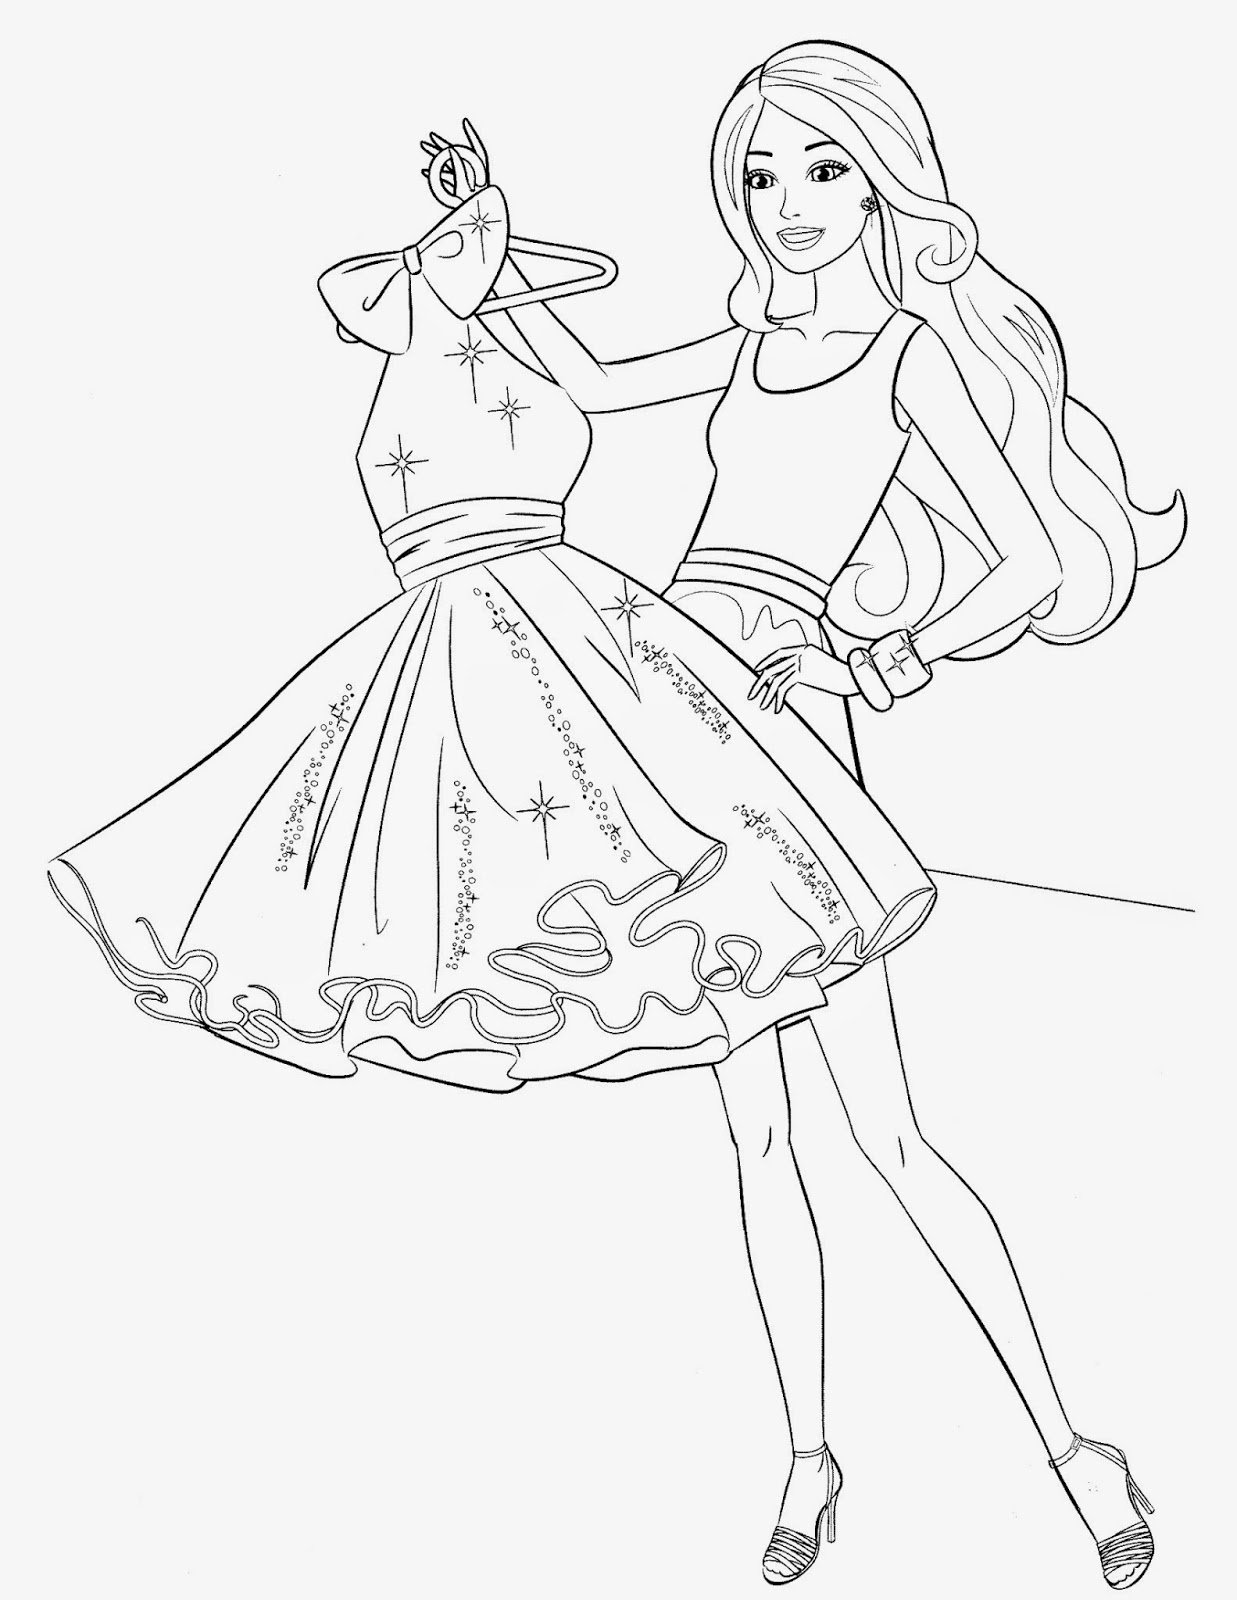 Printable Barbie holding a dress Coloring Page for kids.